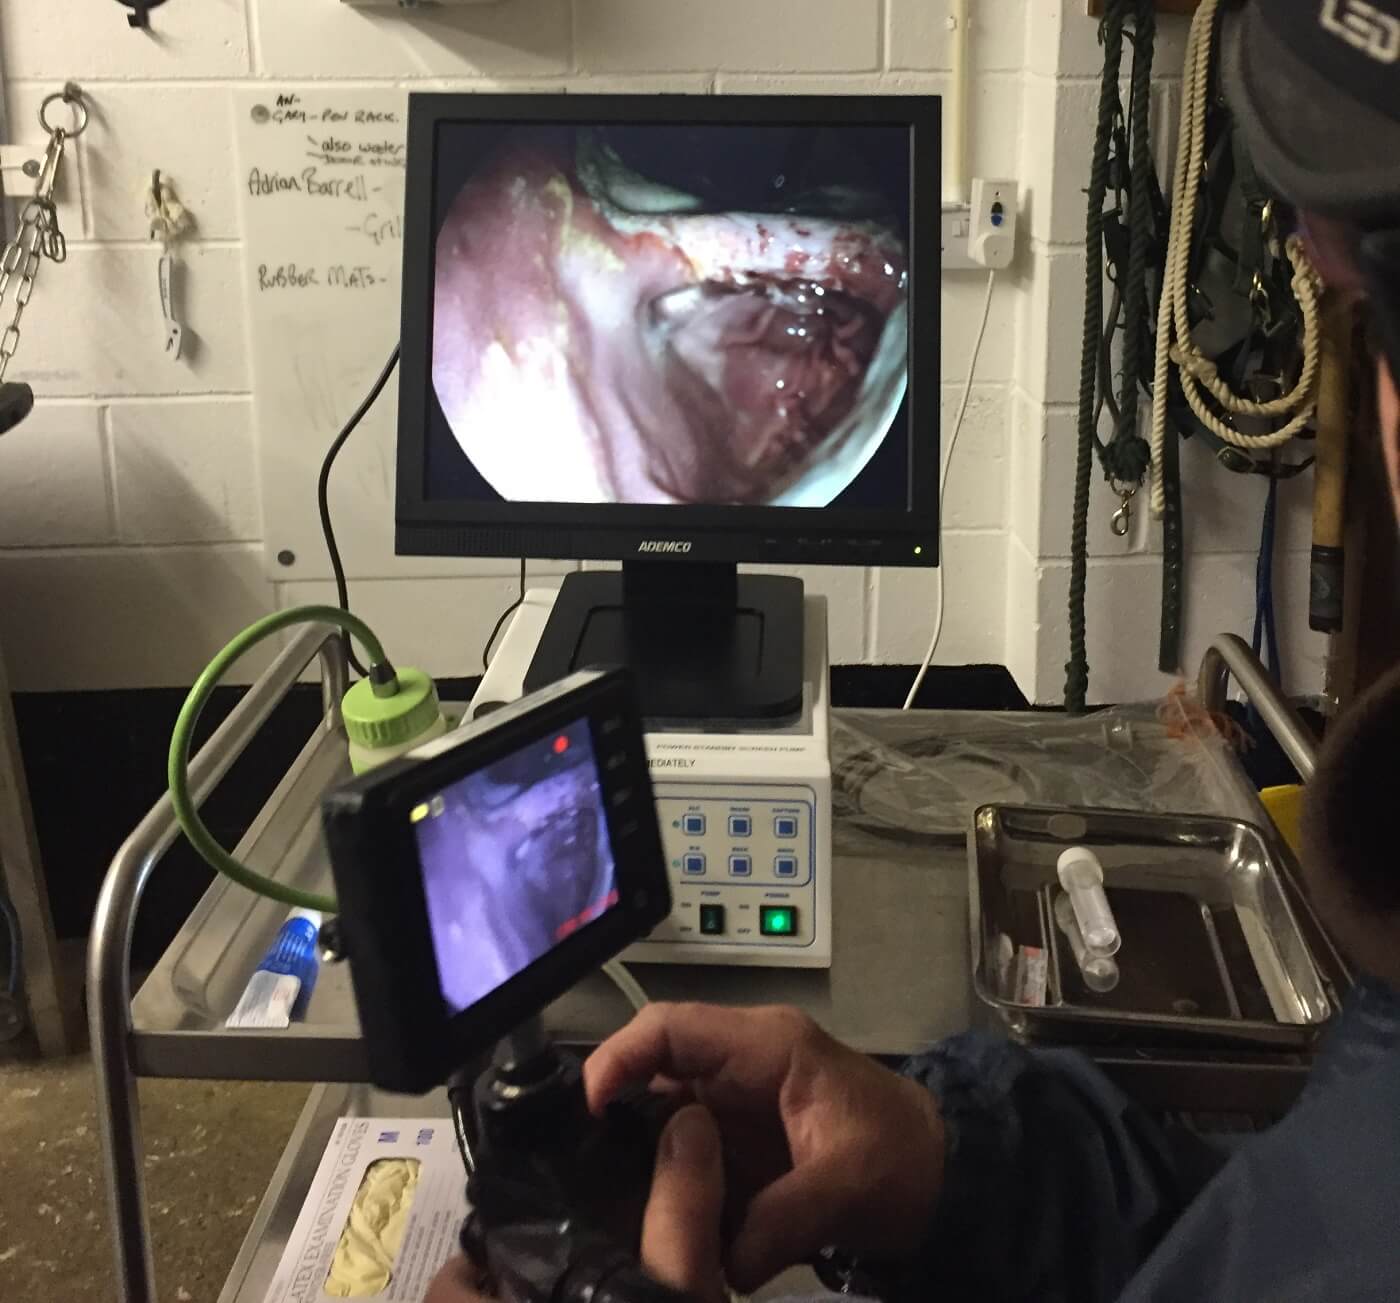 Grade 4 Squamous ulcers on the screen using Deben Valley's Gastroscope